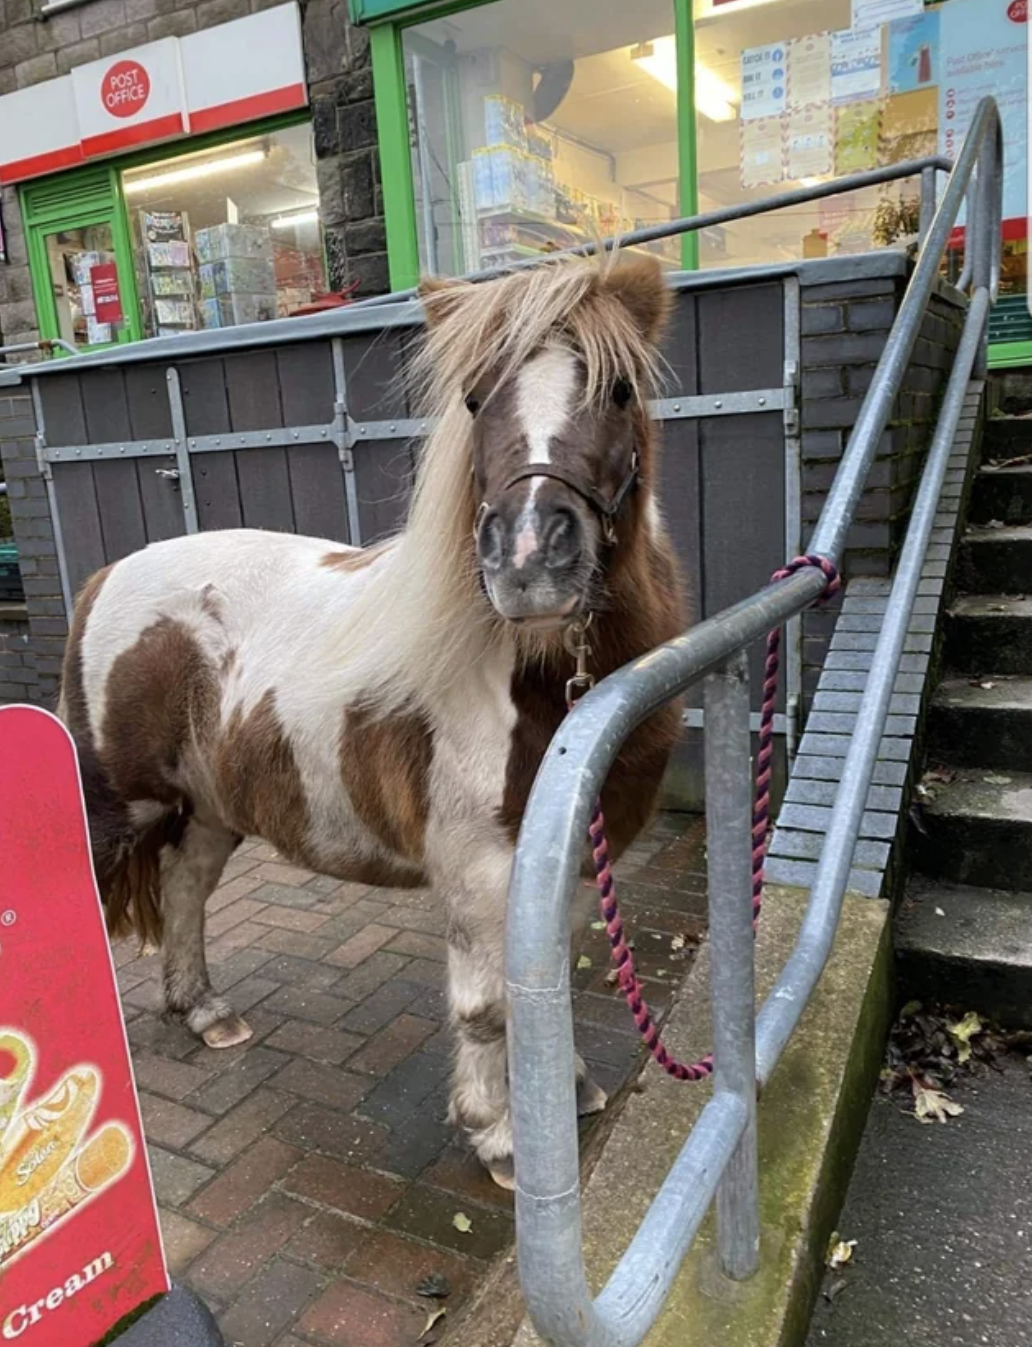 A pony is tied up outside of a postal office